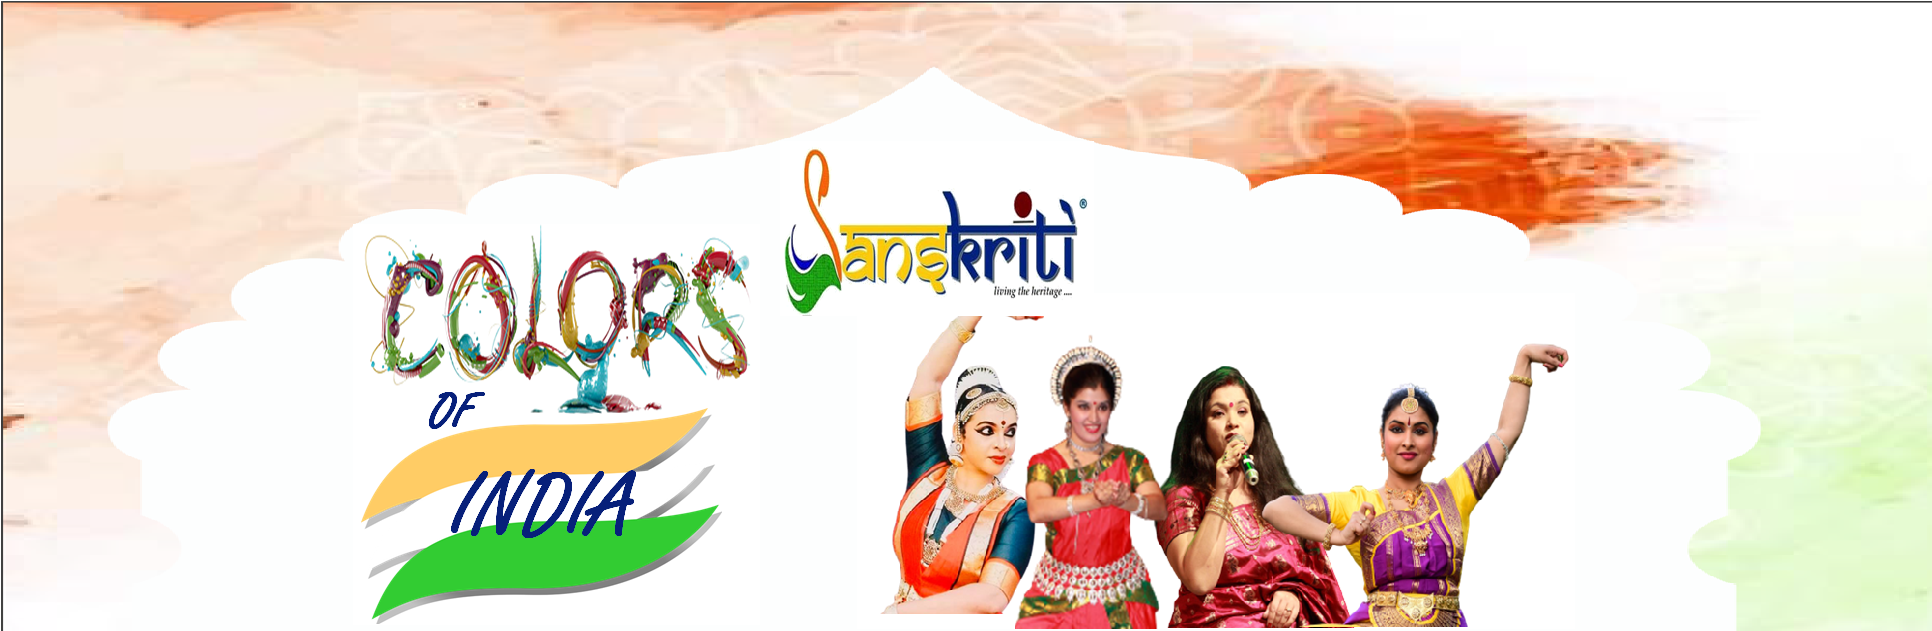 Banner for Indian Cultural Festival, celebrating 75 years of Indian Independences